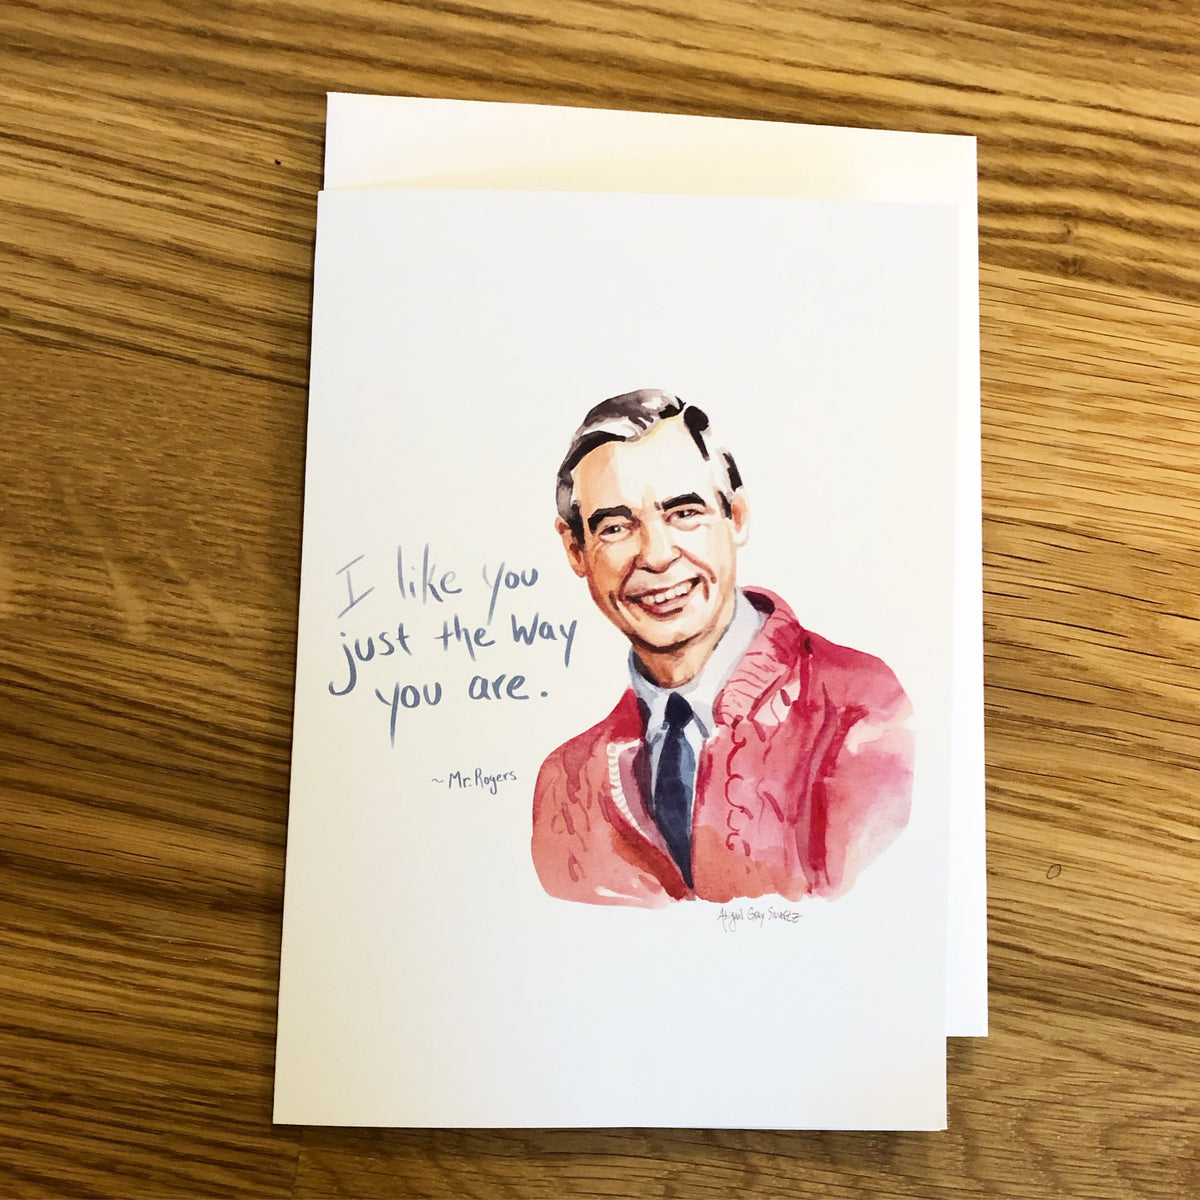 I like you just the way you are. Mr Rogers Portrait--Greeting Card